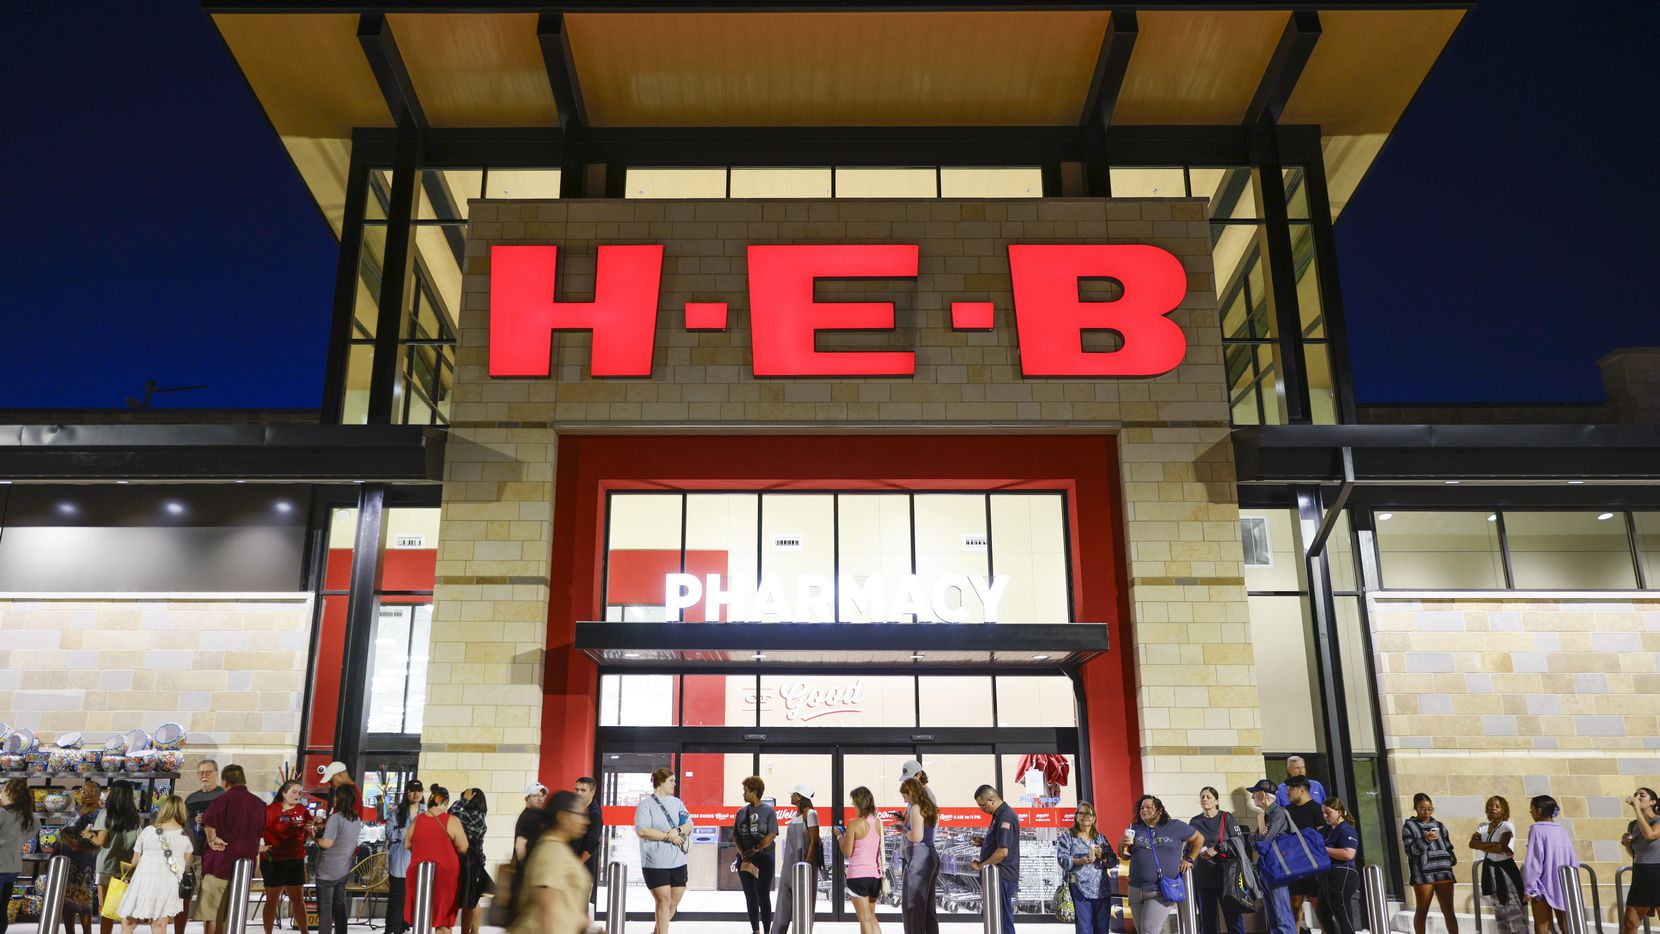 Here's where H-E-B has opened stores in D-FW and what's coming next